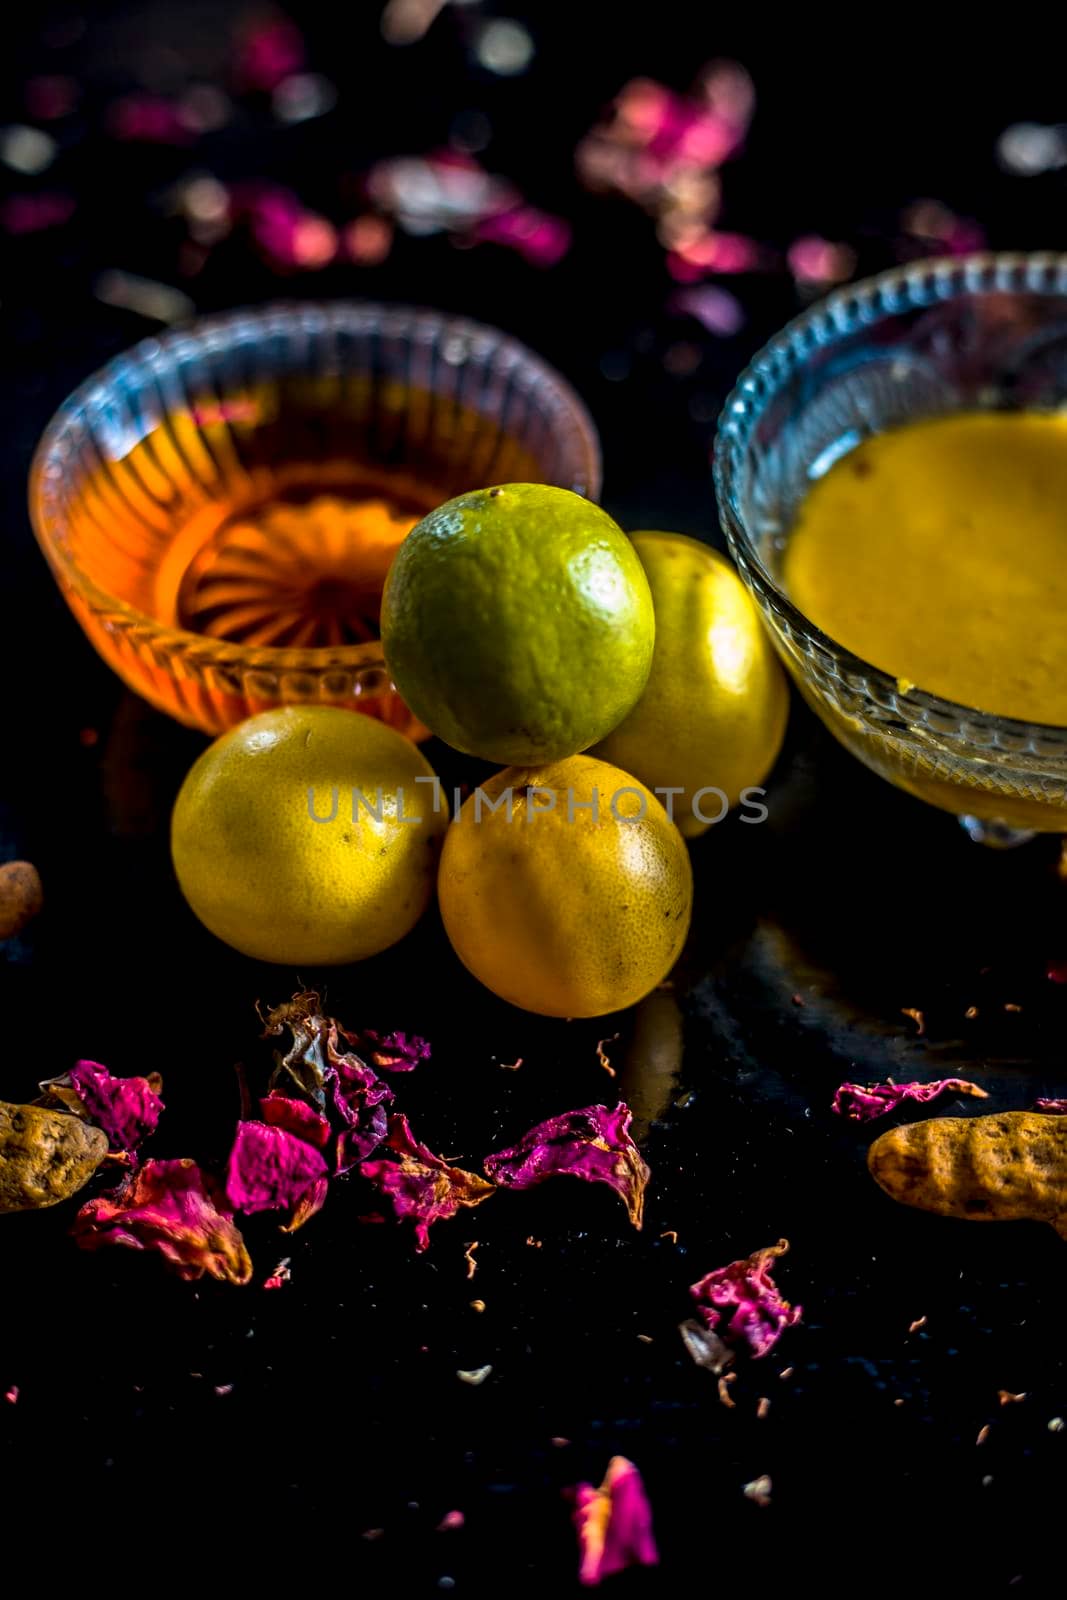 Face mask of lemon juice, honey, and curd along with some raw turmeric well mixed in a glass bowl along with entire raw ingredients on the wooden surface for acne-prone skin and blemishes. by mirzamlk